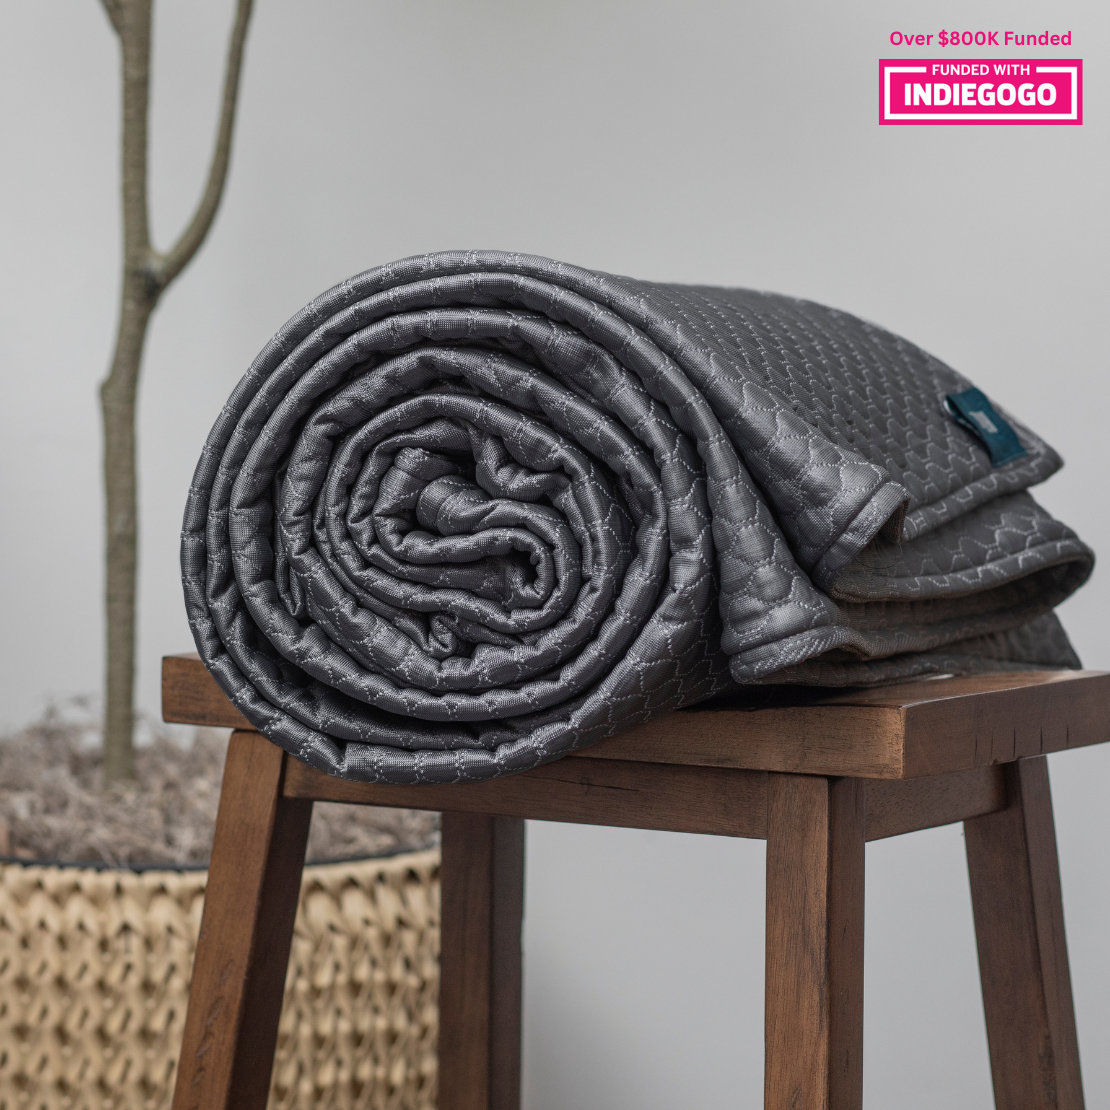 A neatly rolled gray quilted blanket with a diamond pattern rests atop a wooden stool. The blanket displays intricate stitching and has a small label at one end. In the background, there's a blurred view of a tall thin tree and a woven basket.